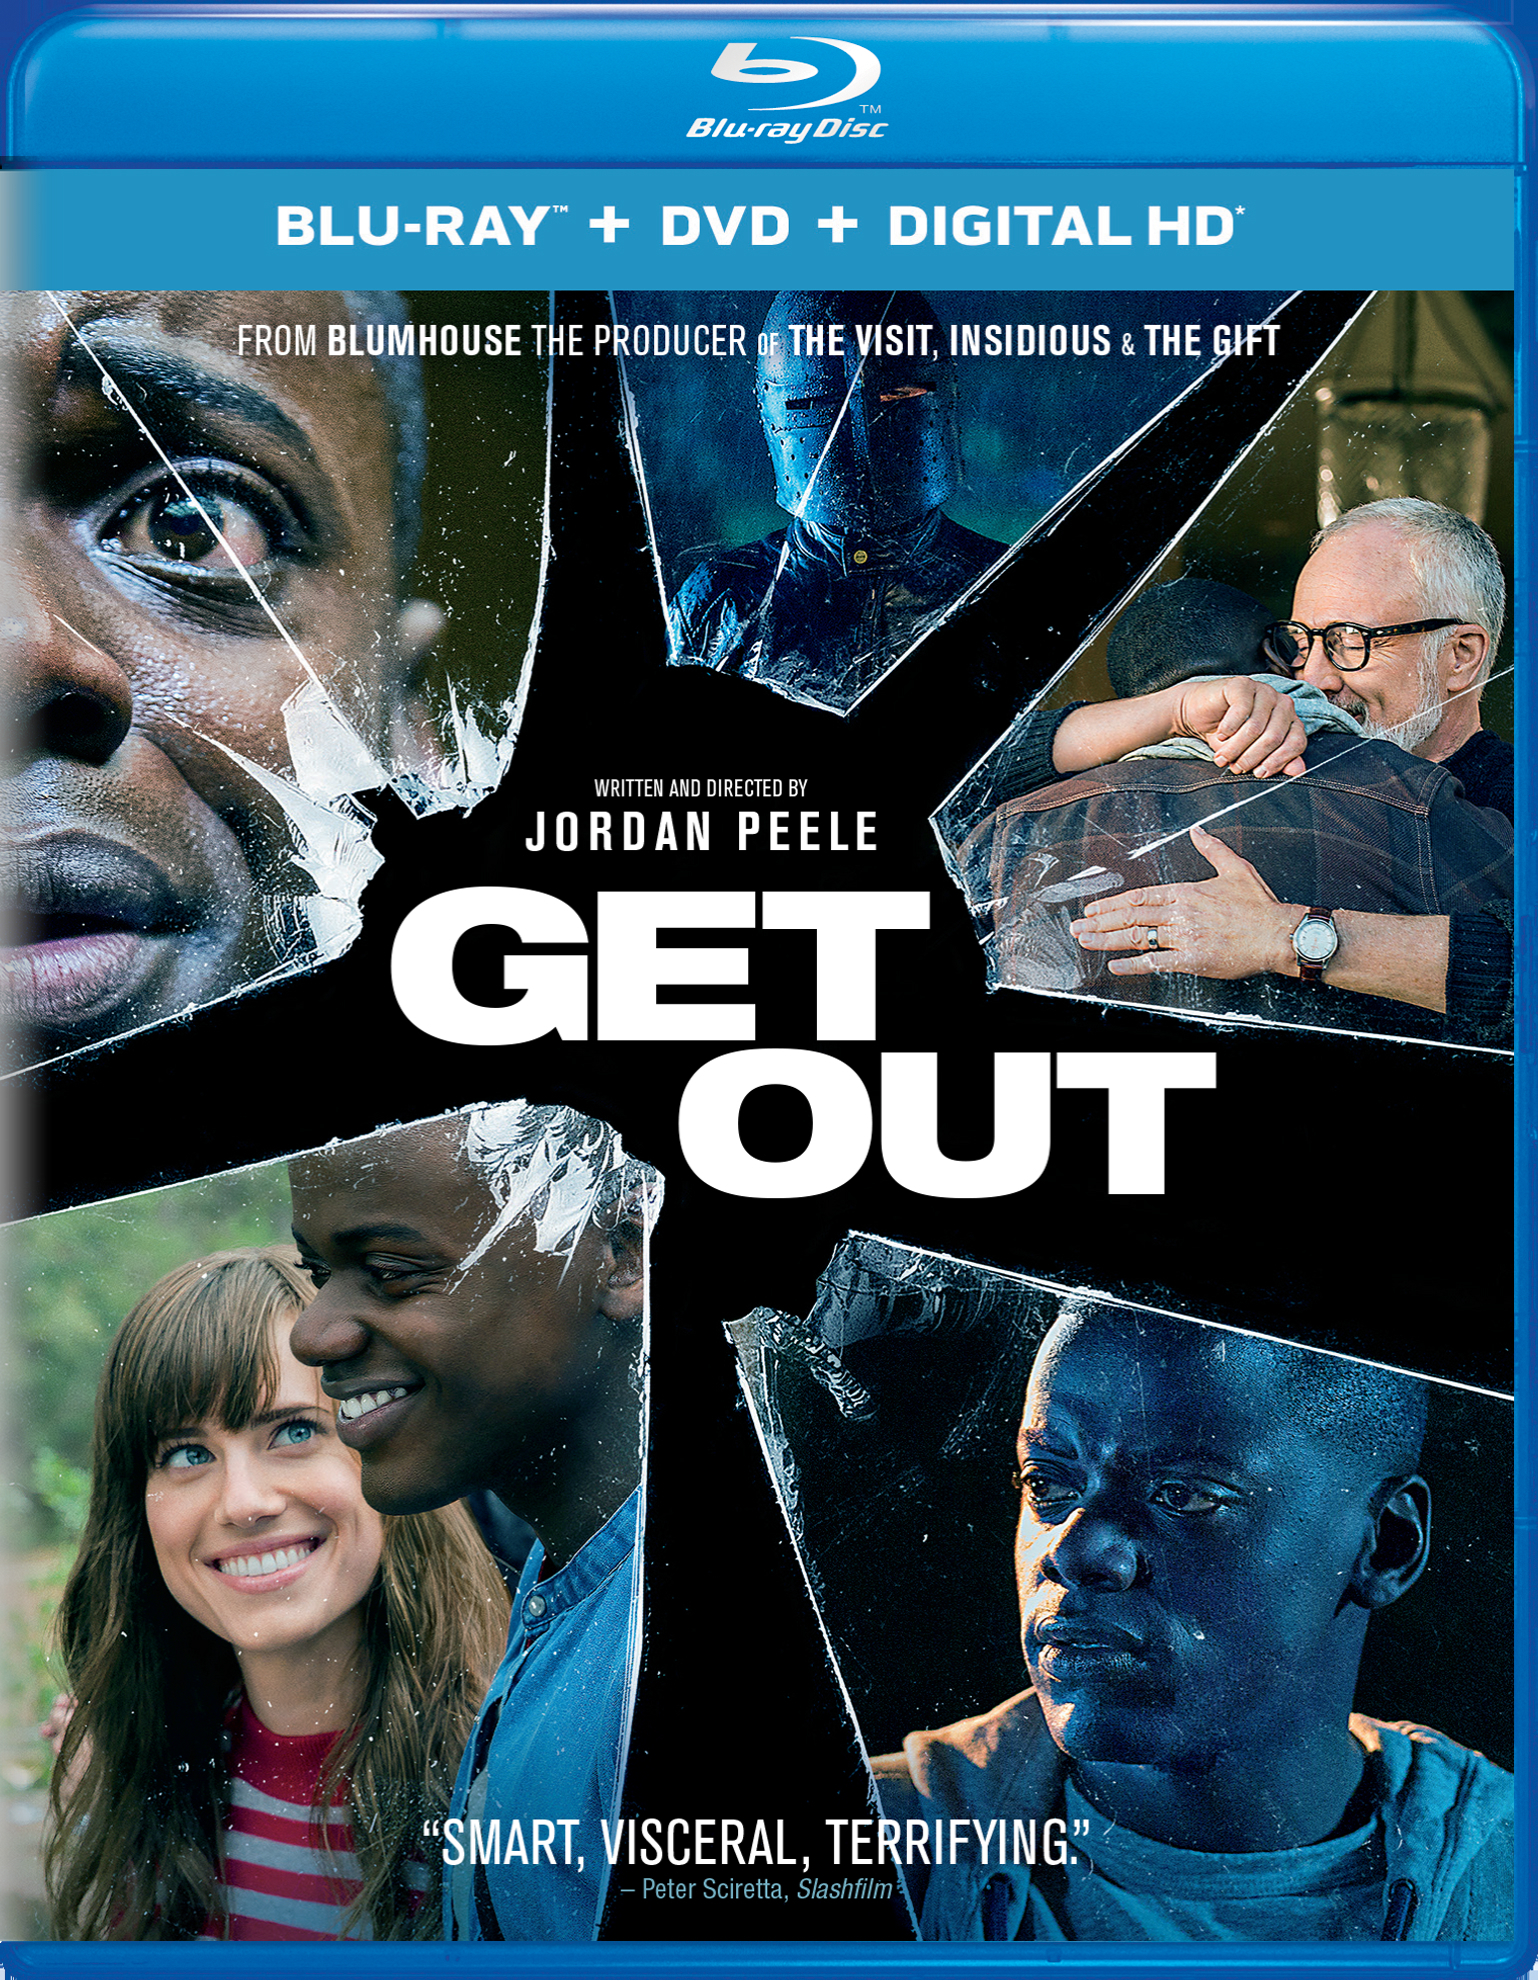 Get Out (DVD) - Blu-ray [ 2017 ]  - Horror Movies On Blu-ray - Movies On GRUV